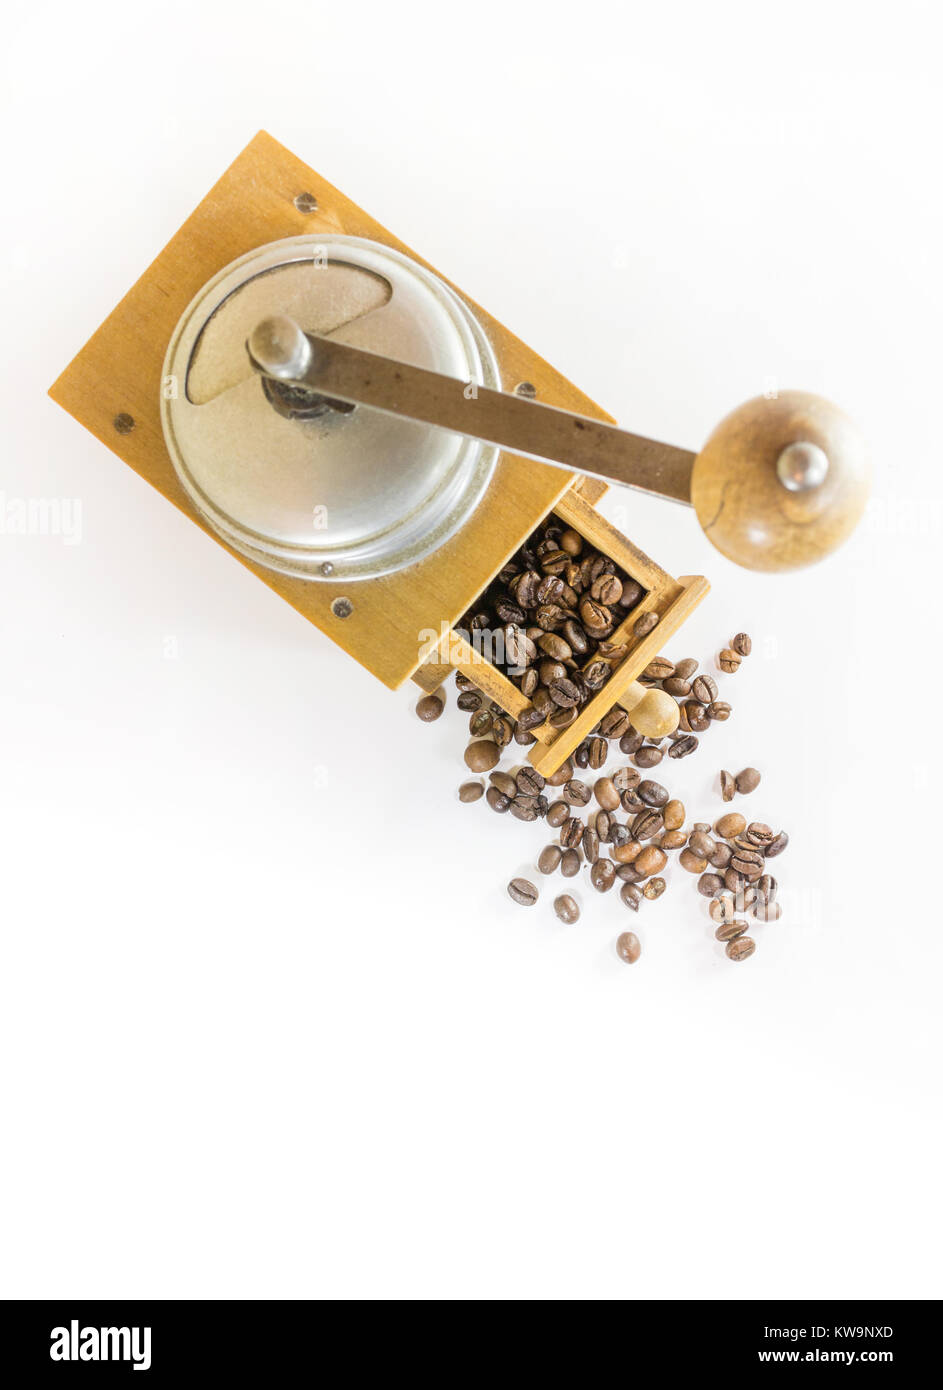 https://c8.alamy.com/comp/KW9NXD/wooden-vintage-coffee-grinder-and-roasted-coffee-beans-isolated-on-KW9NXD.jpg